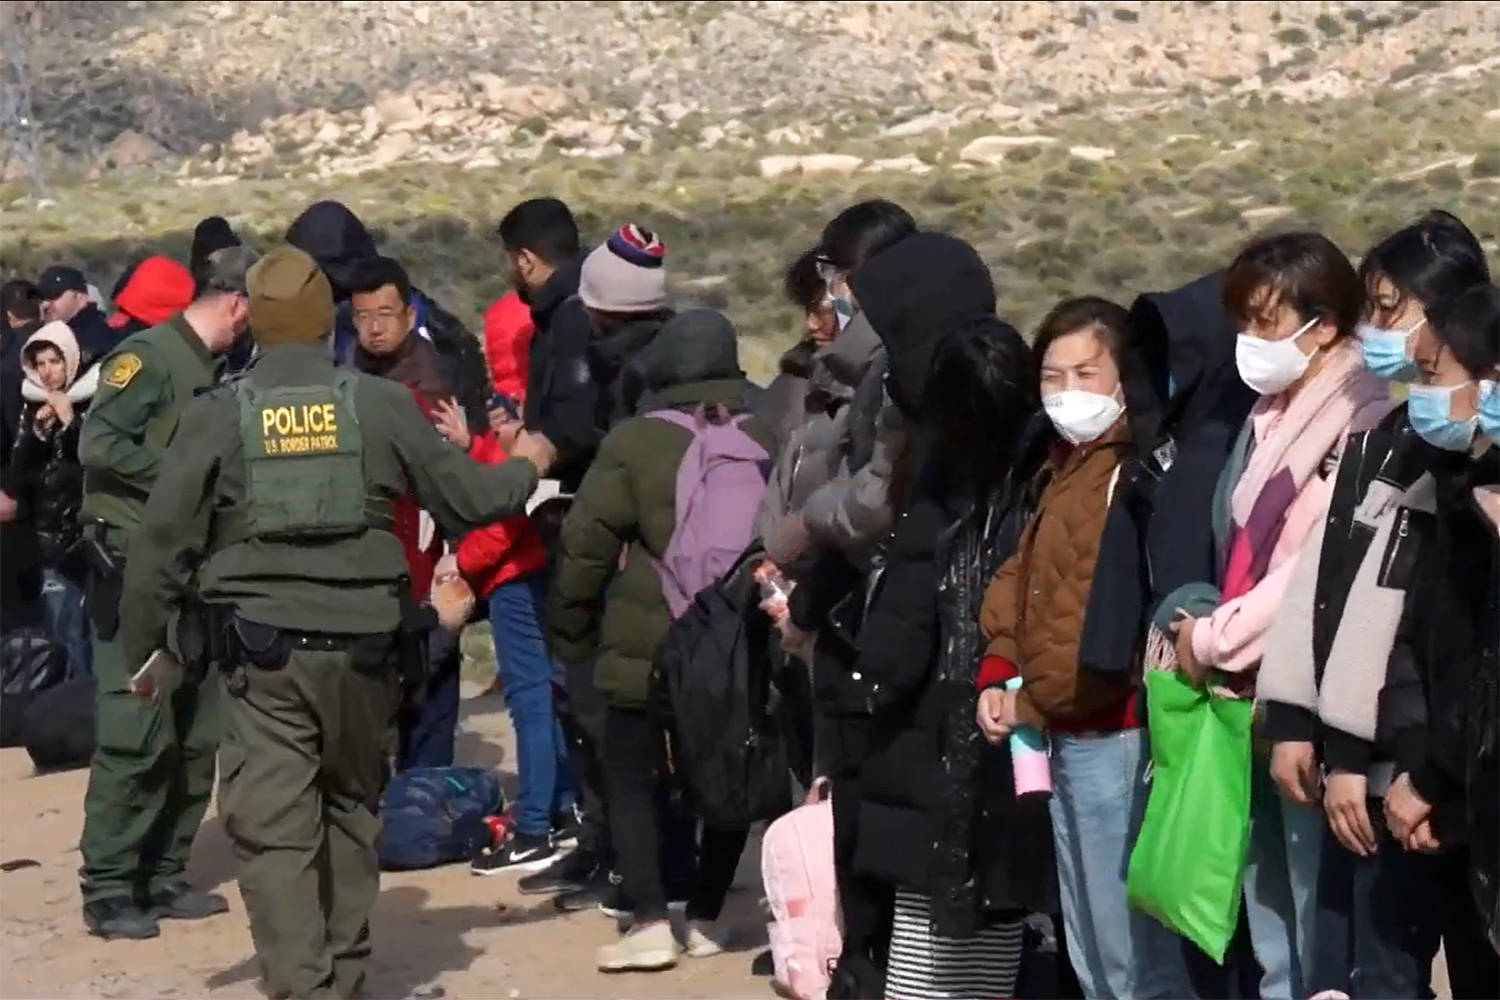 There’s been a major shift in demographics at the border. Here’s what’s behind the change.